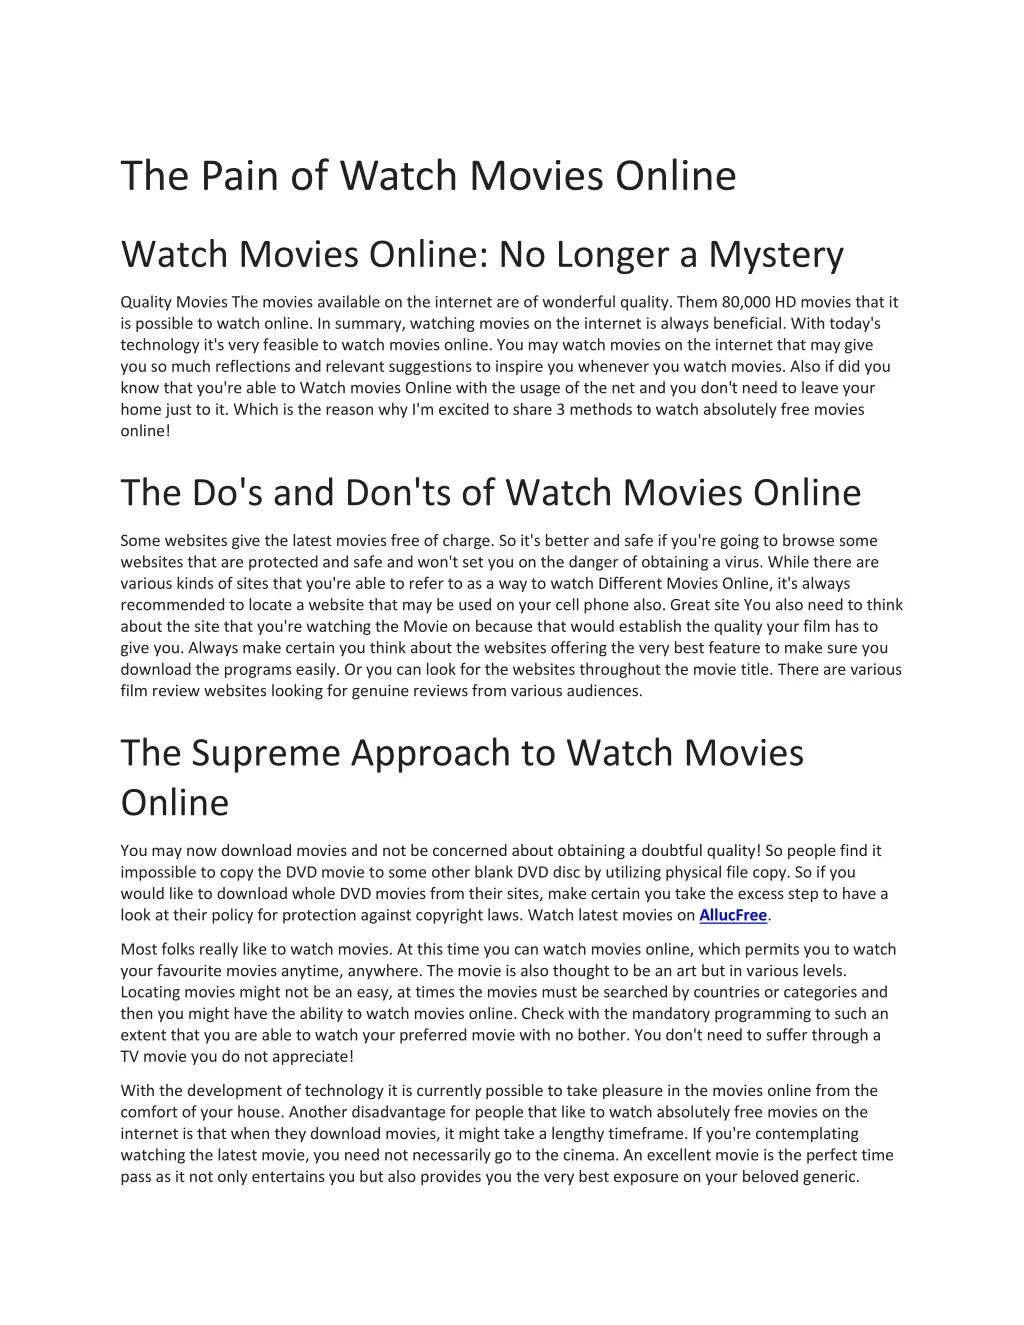 the pain of watch movies online